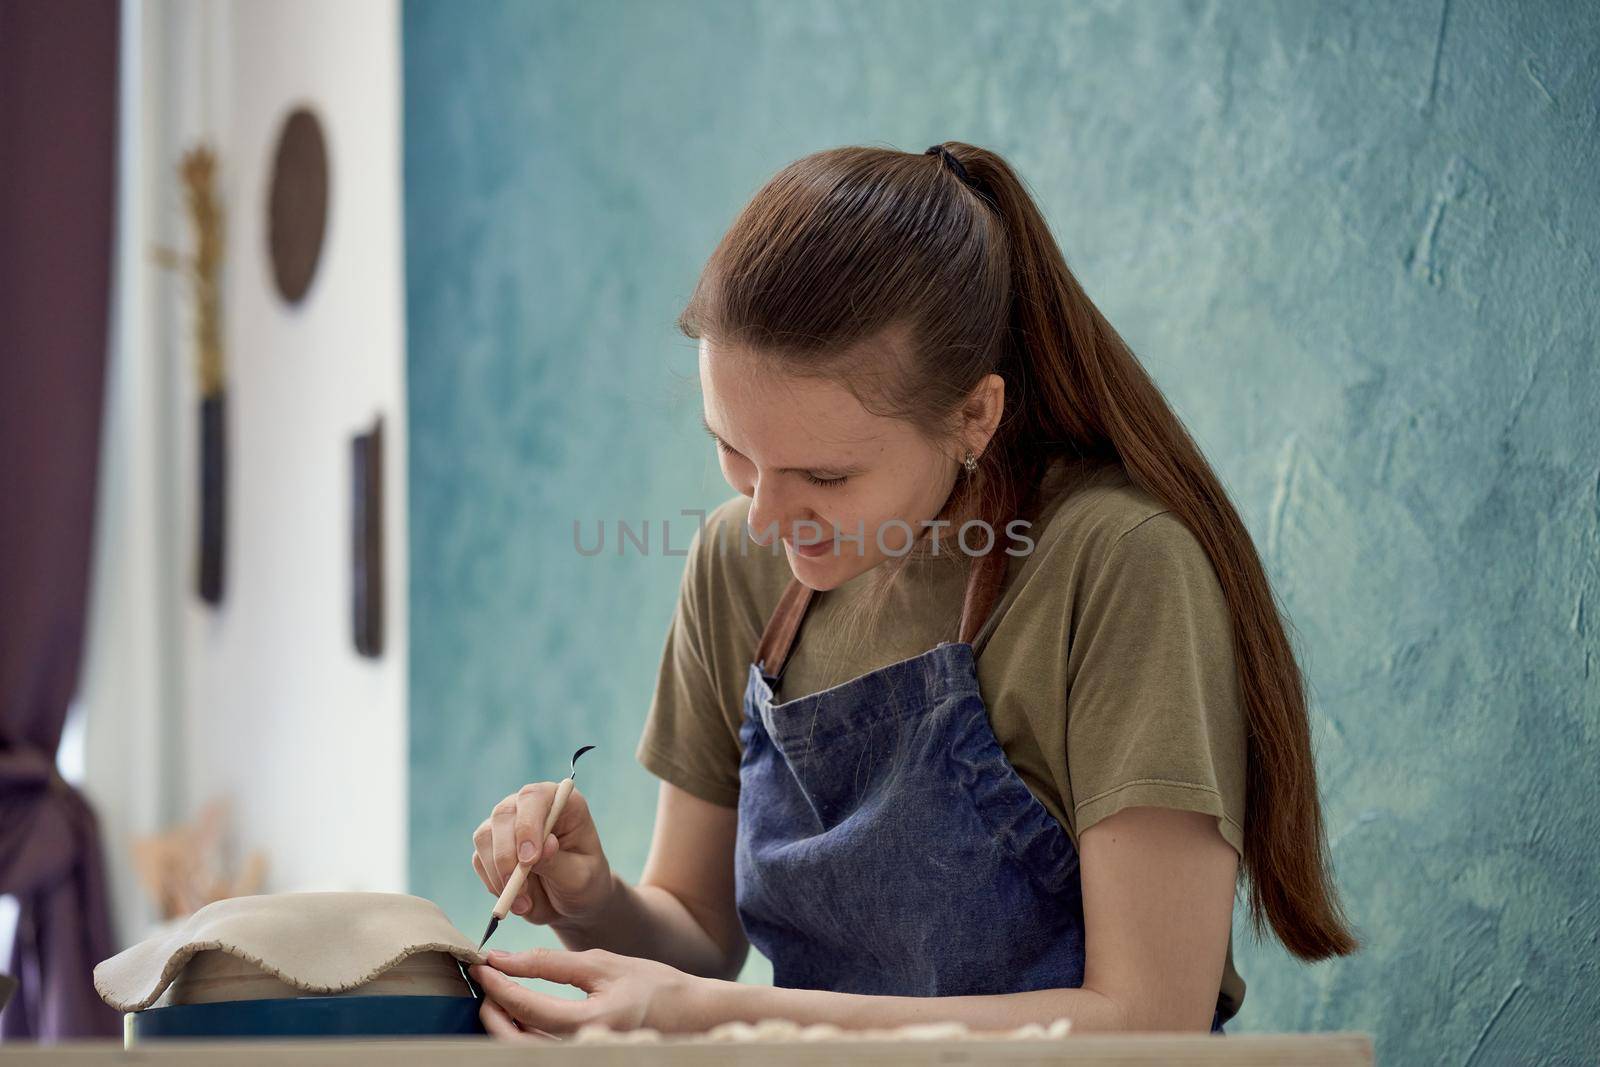 Woman making ceramic plate on workshop. Concept for woman in freelance, business. Handcraft product. Earn extra money, side hustle, turning hobbies into job.